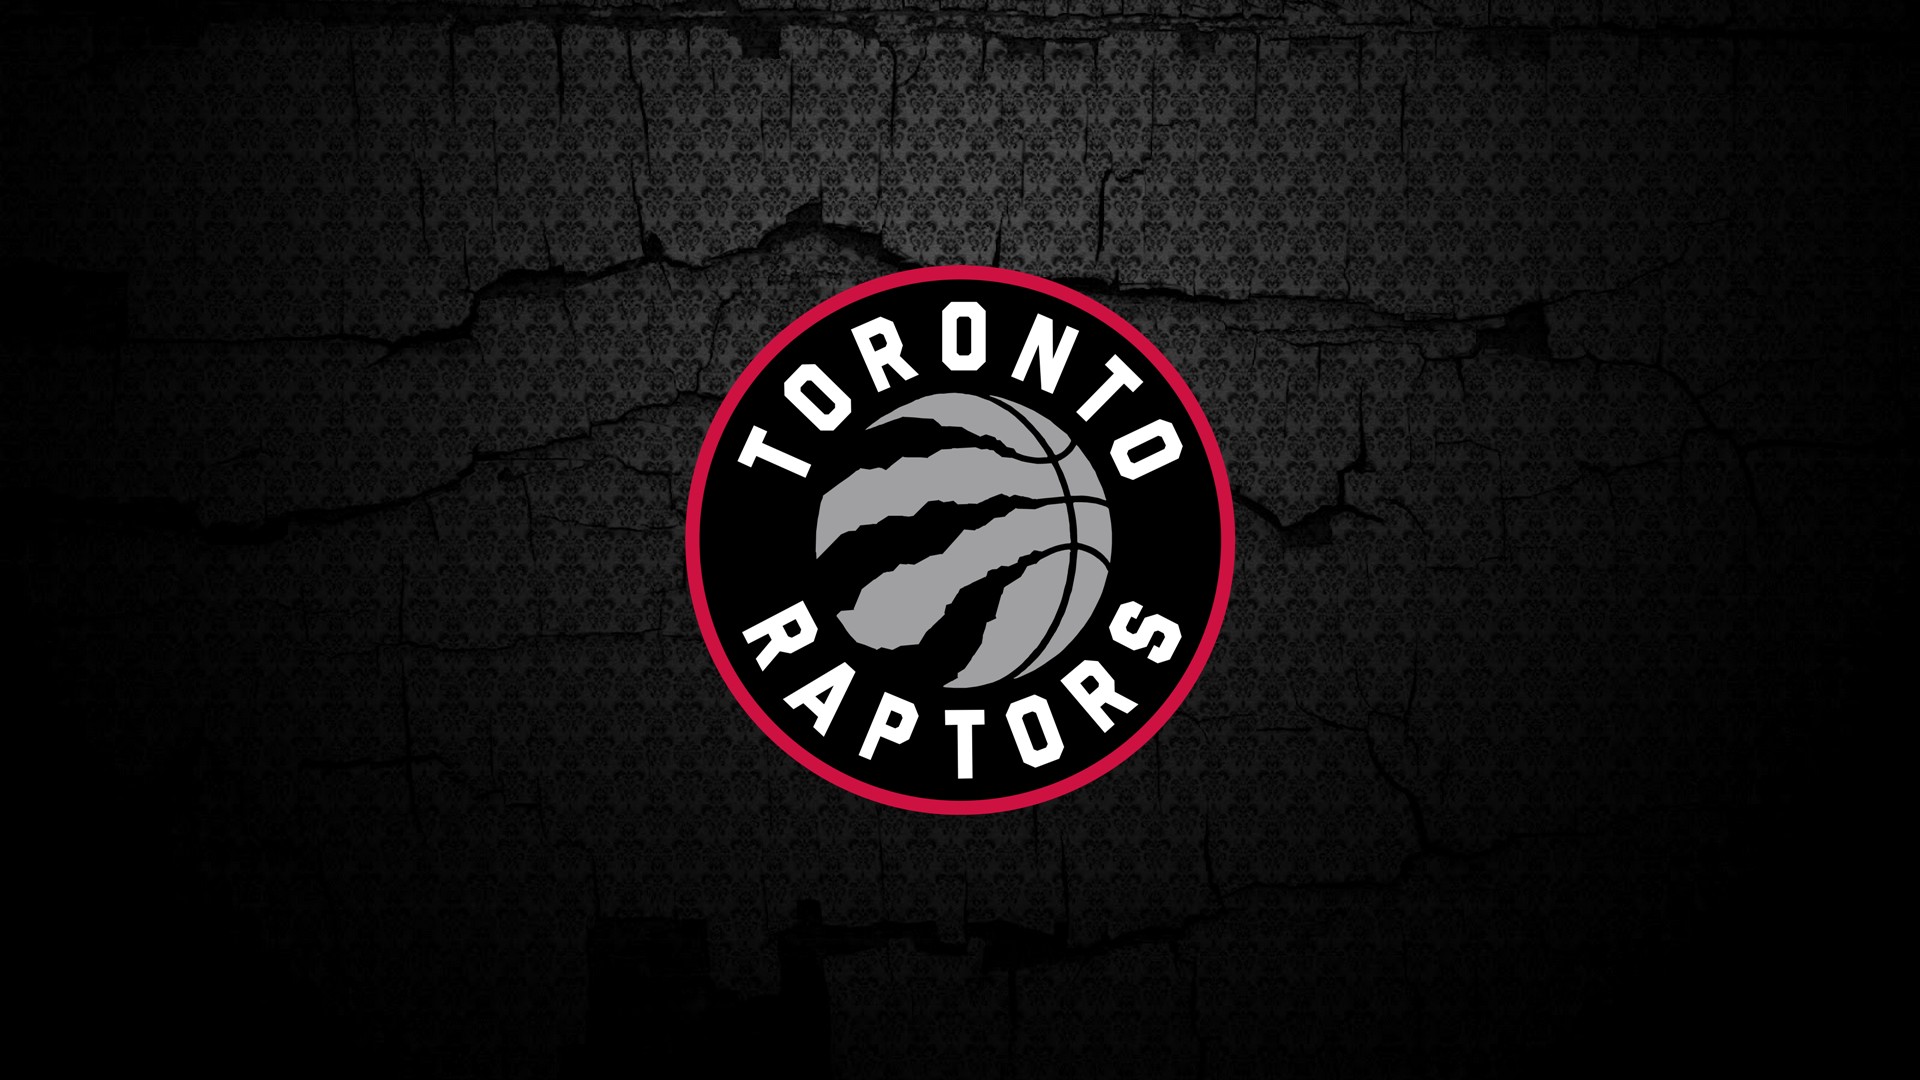 Toronto Raptors Desktop Backgrounds With Resolution 1920X1080 pixel. You can make this wallpaper for your Desktop Computer Backgrounds, Mac Wallpapers, Android Lock screen or iPhone Screensavers